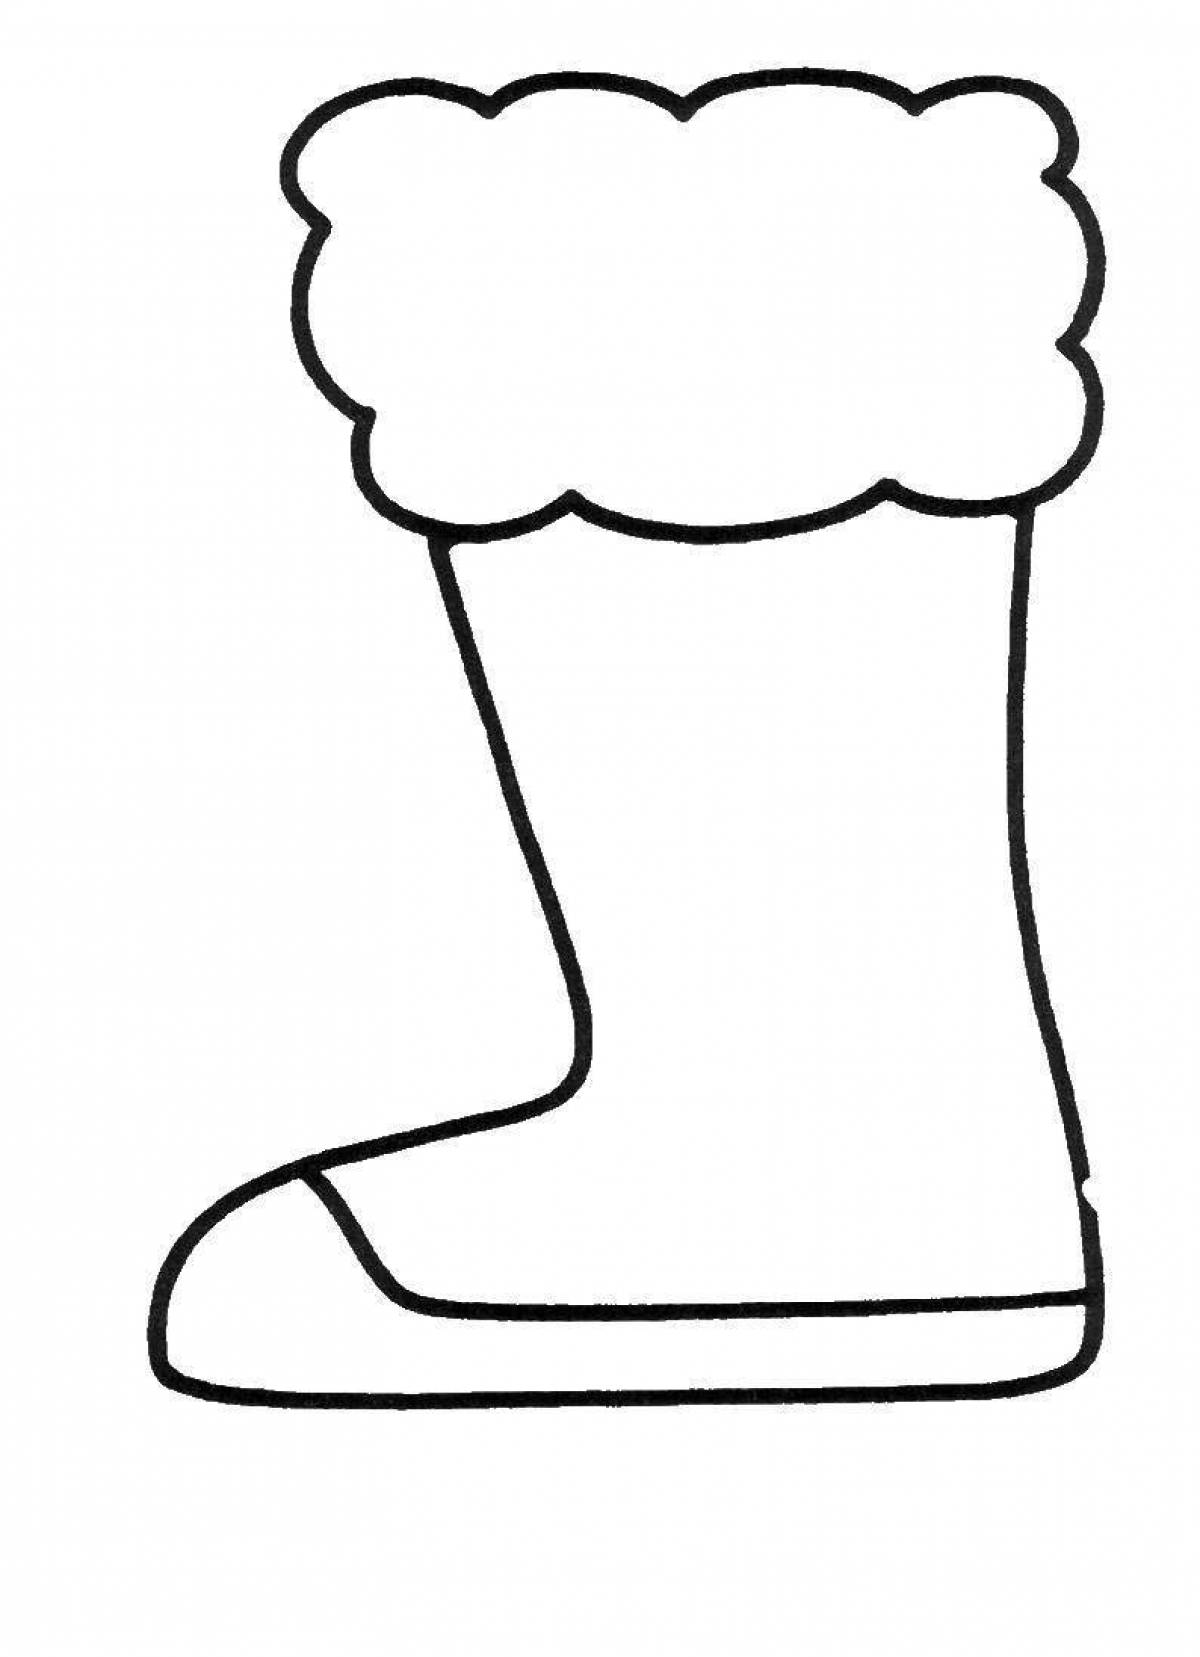 Fun boots coloring for kids